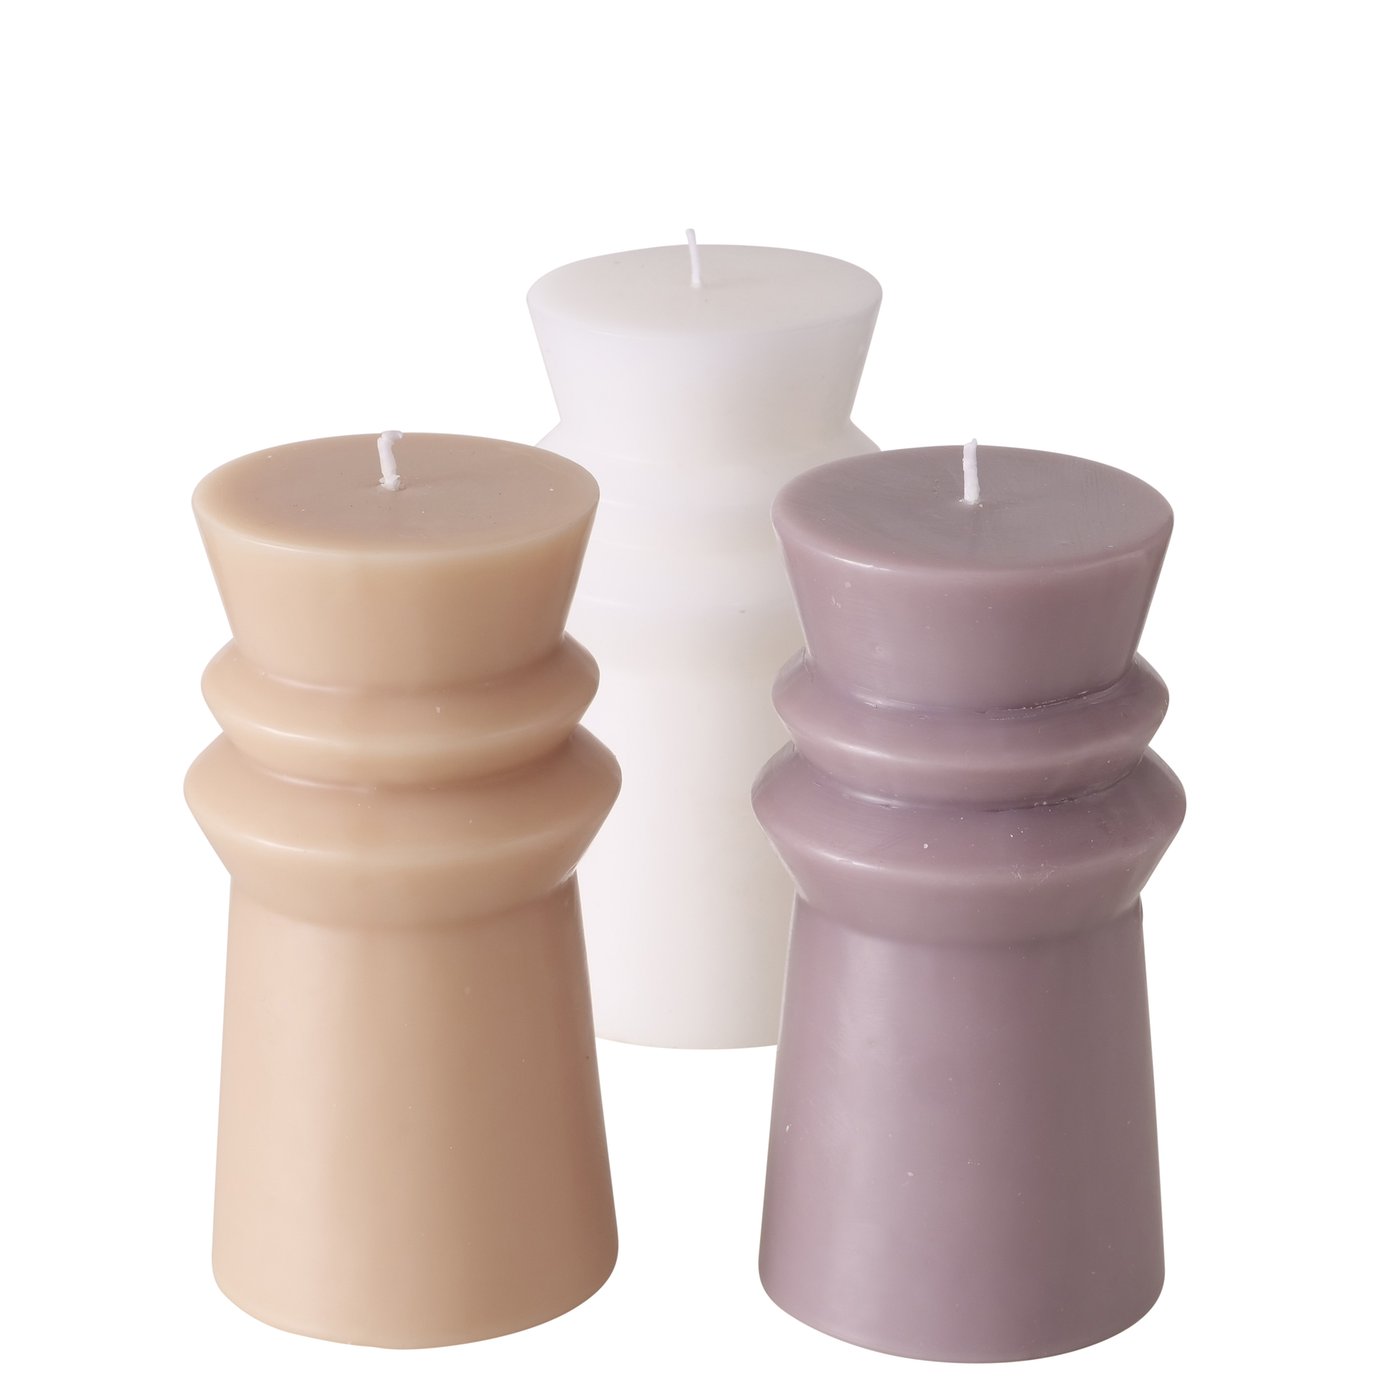 &Quirky Tulo Pillar Candle : Beige, Grey or White